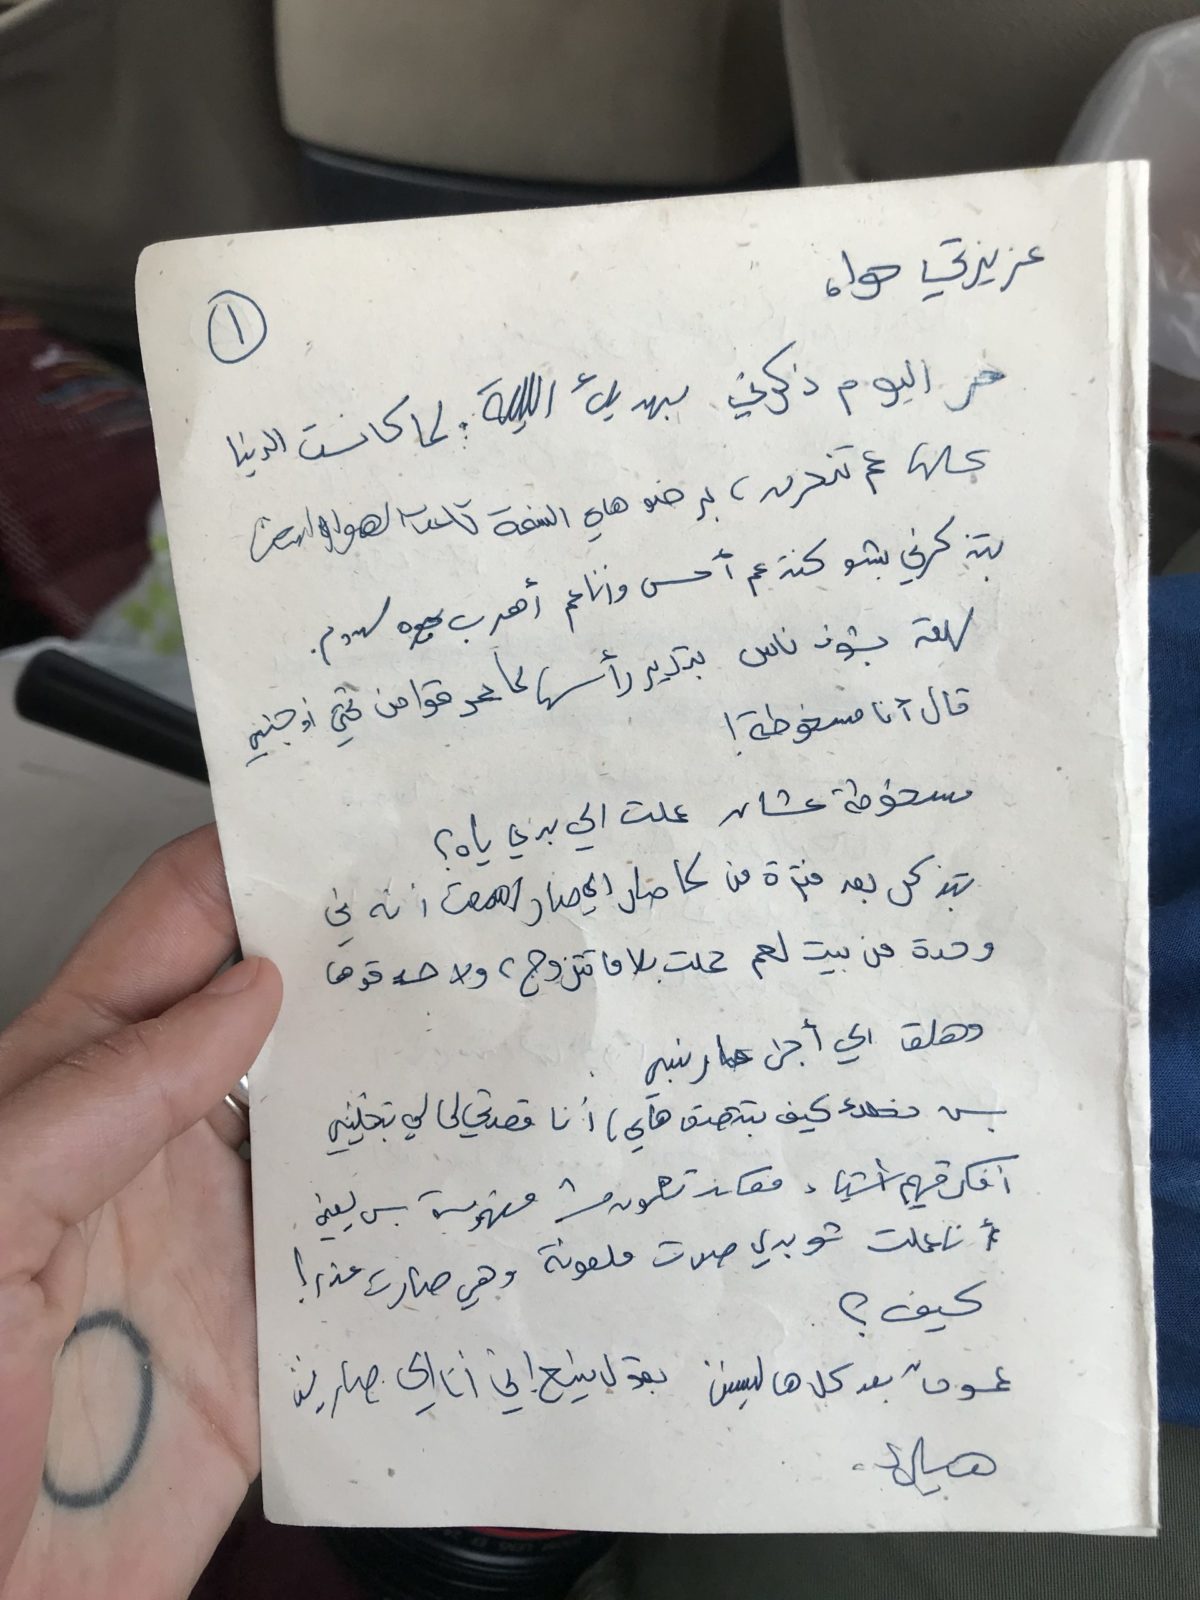 A hand is holding a piece of paper in front of the camera.On the paper, there is a text written in Arabic.